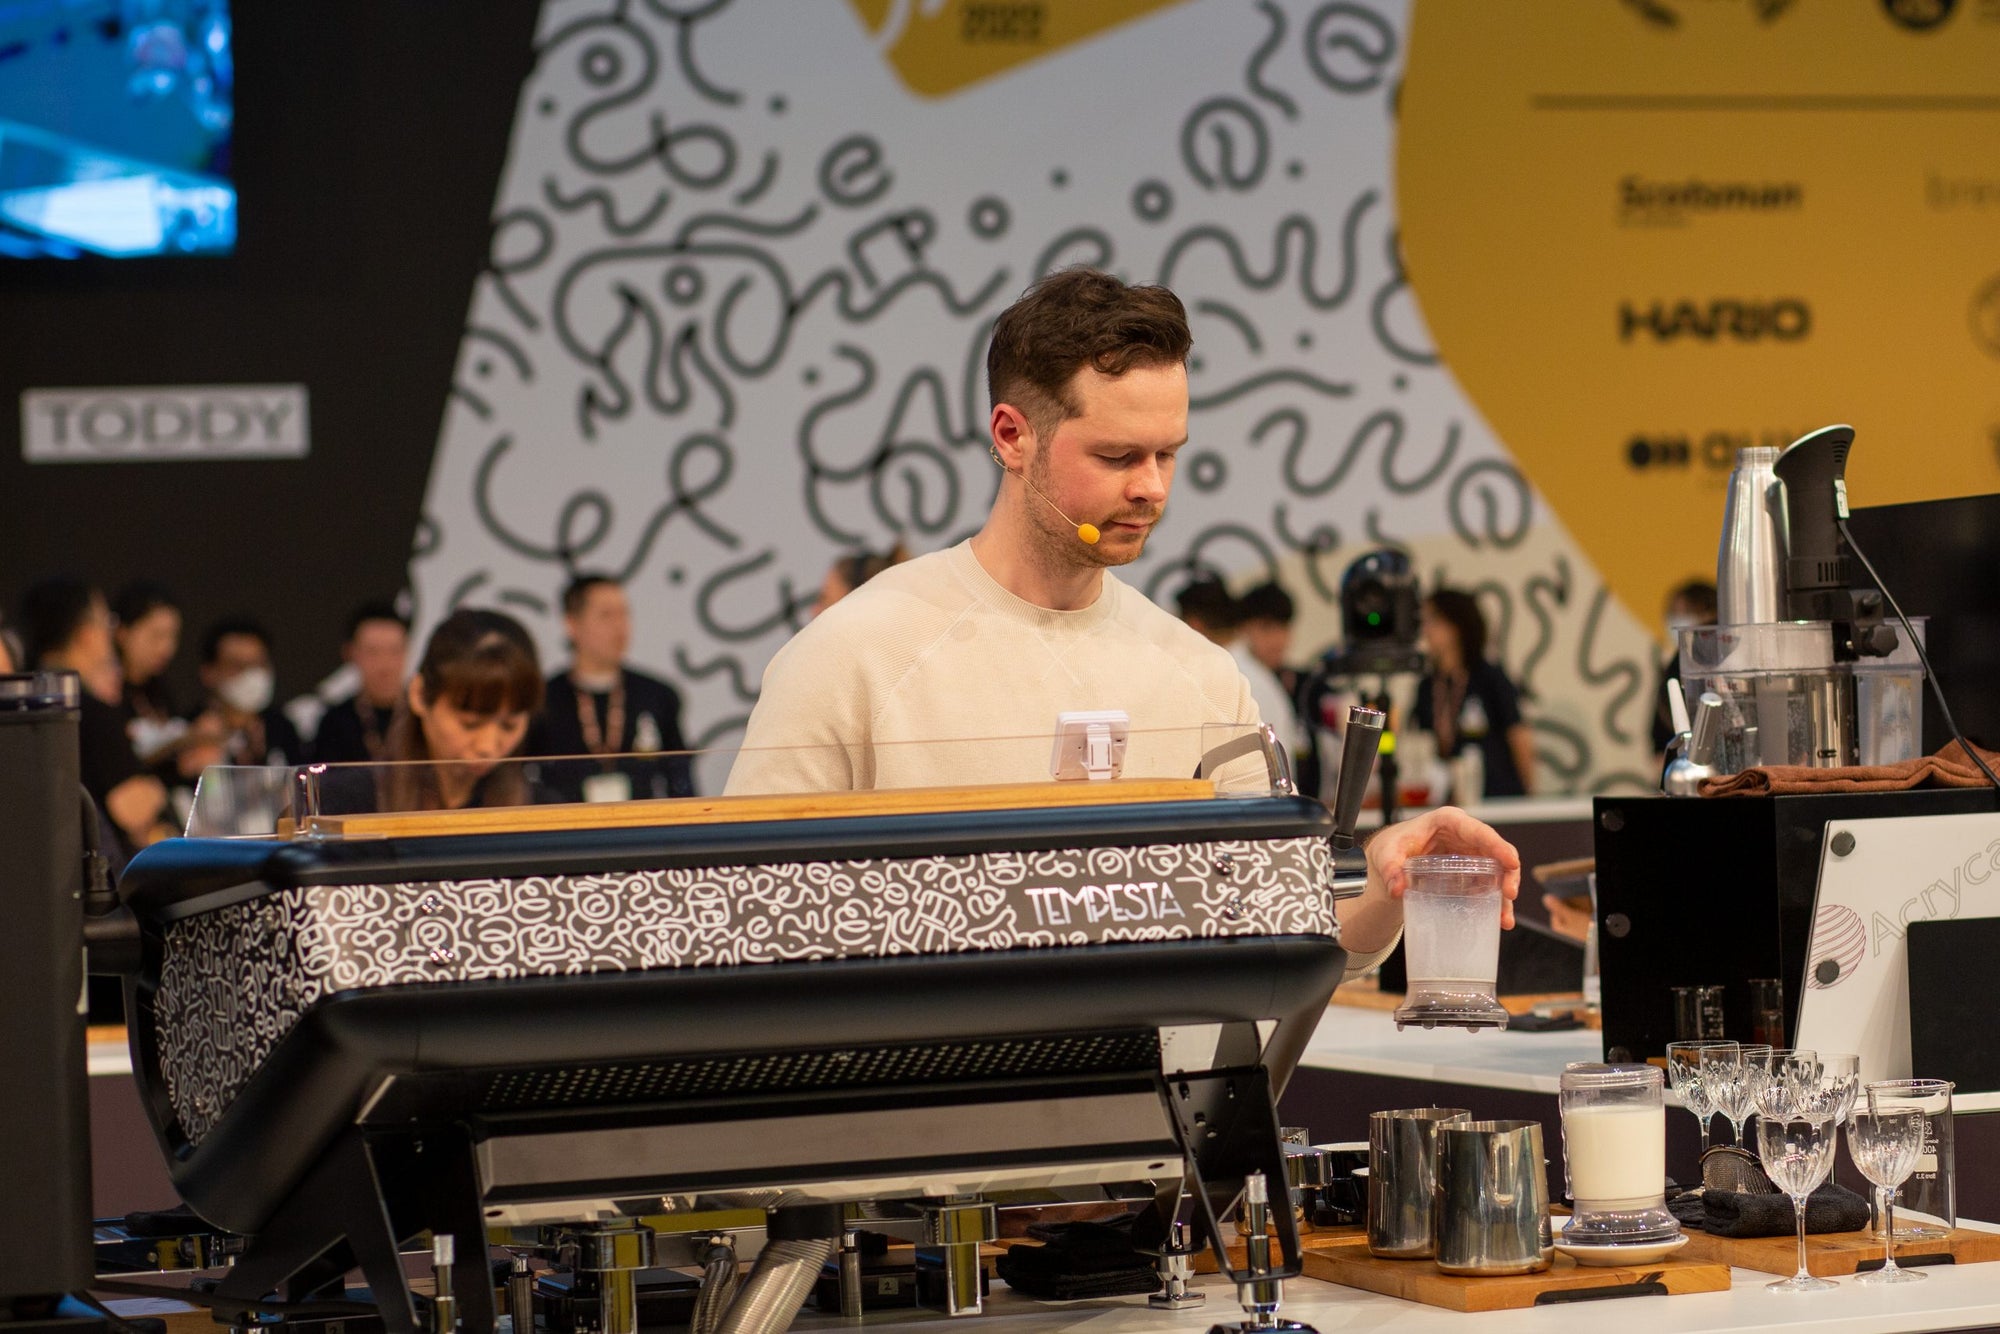 Anthony Douglas has made it to the World Barista Championship Semi Finals!